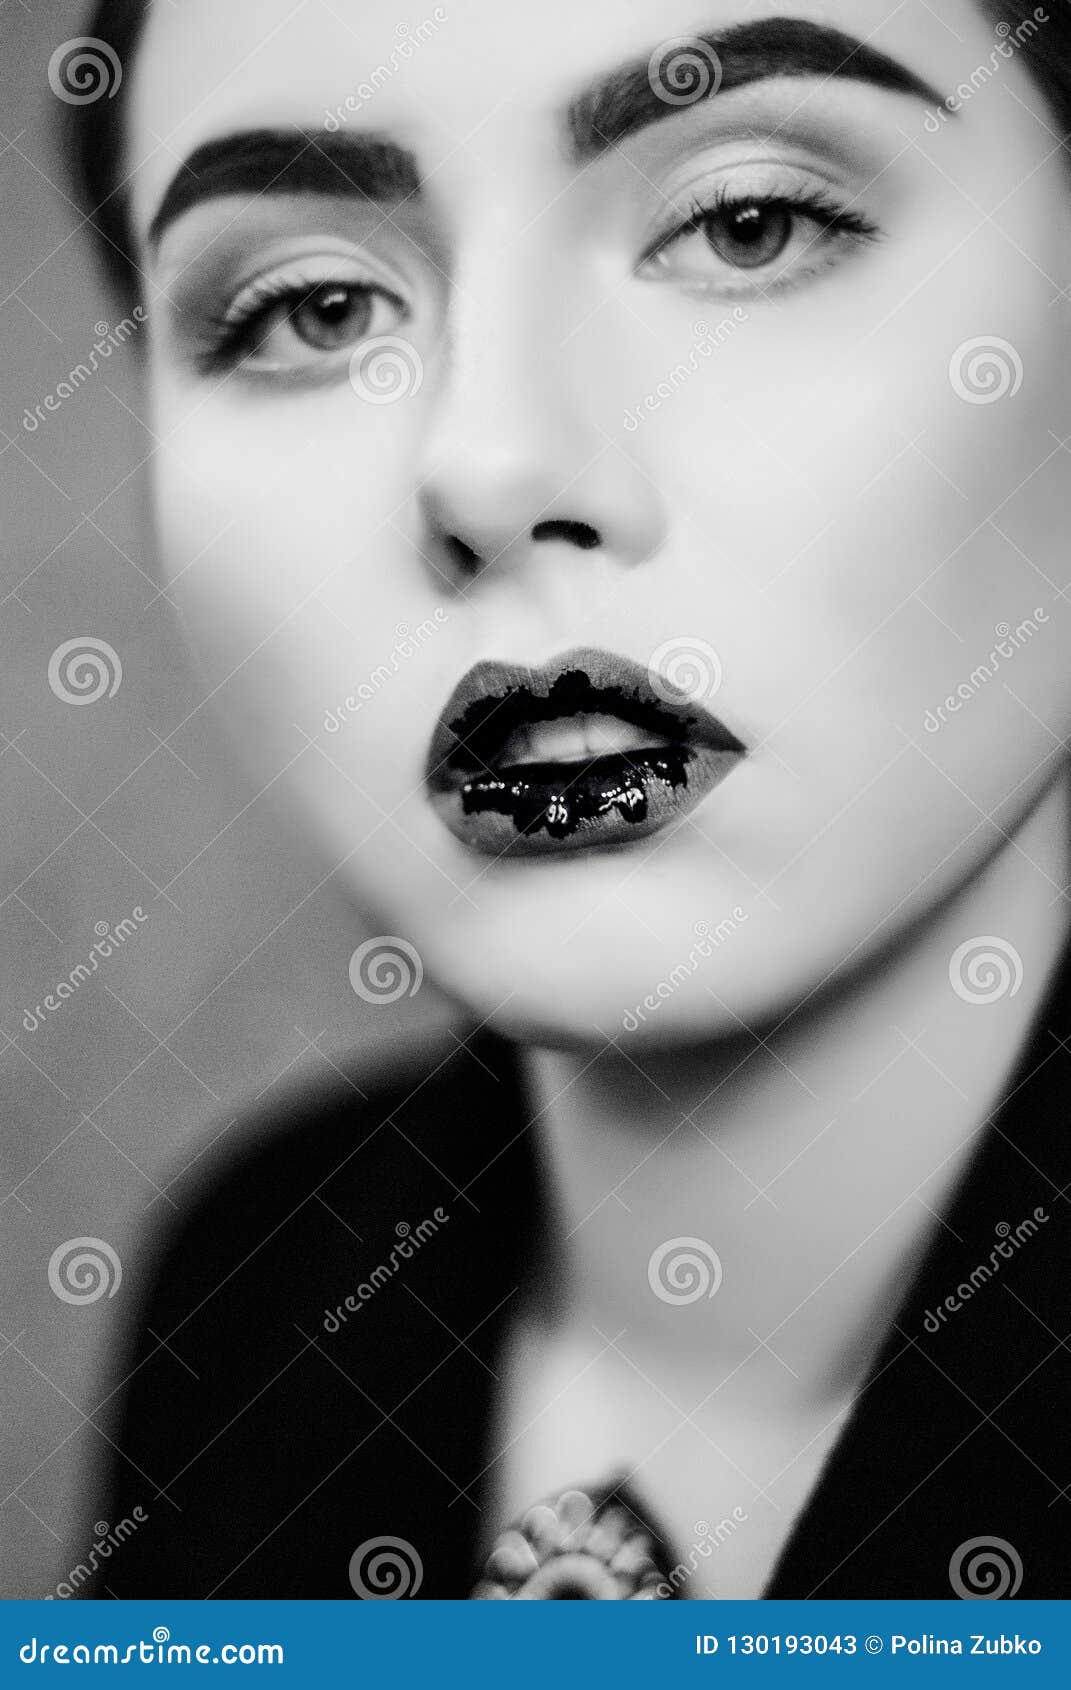 Creative Make Up of Black Liquid Lips in Close Up Black and White Photo ...